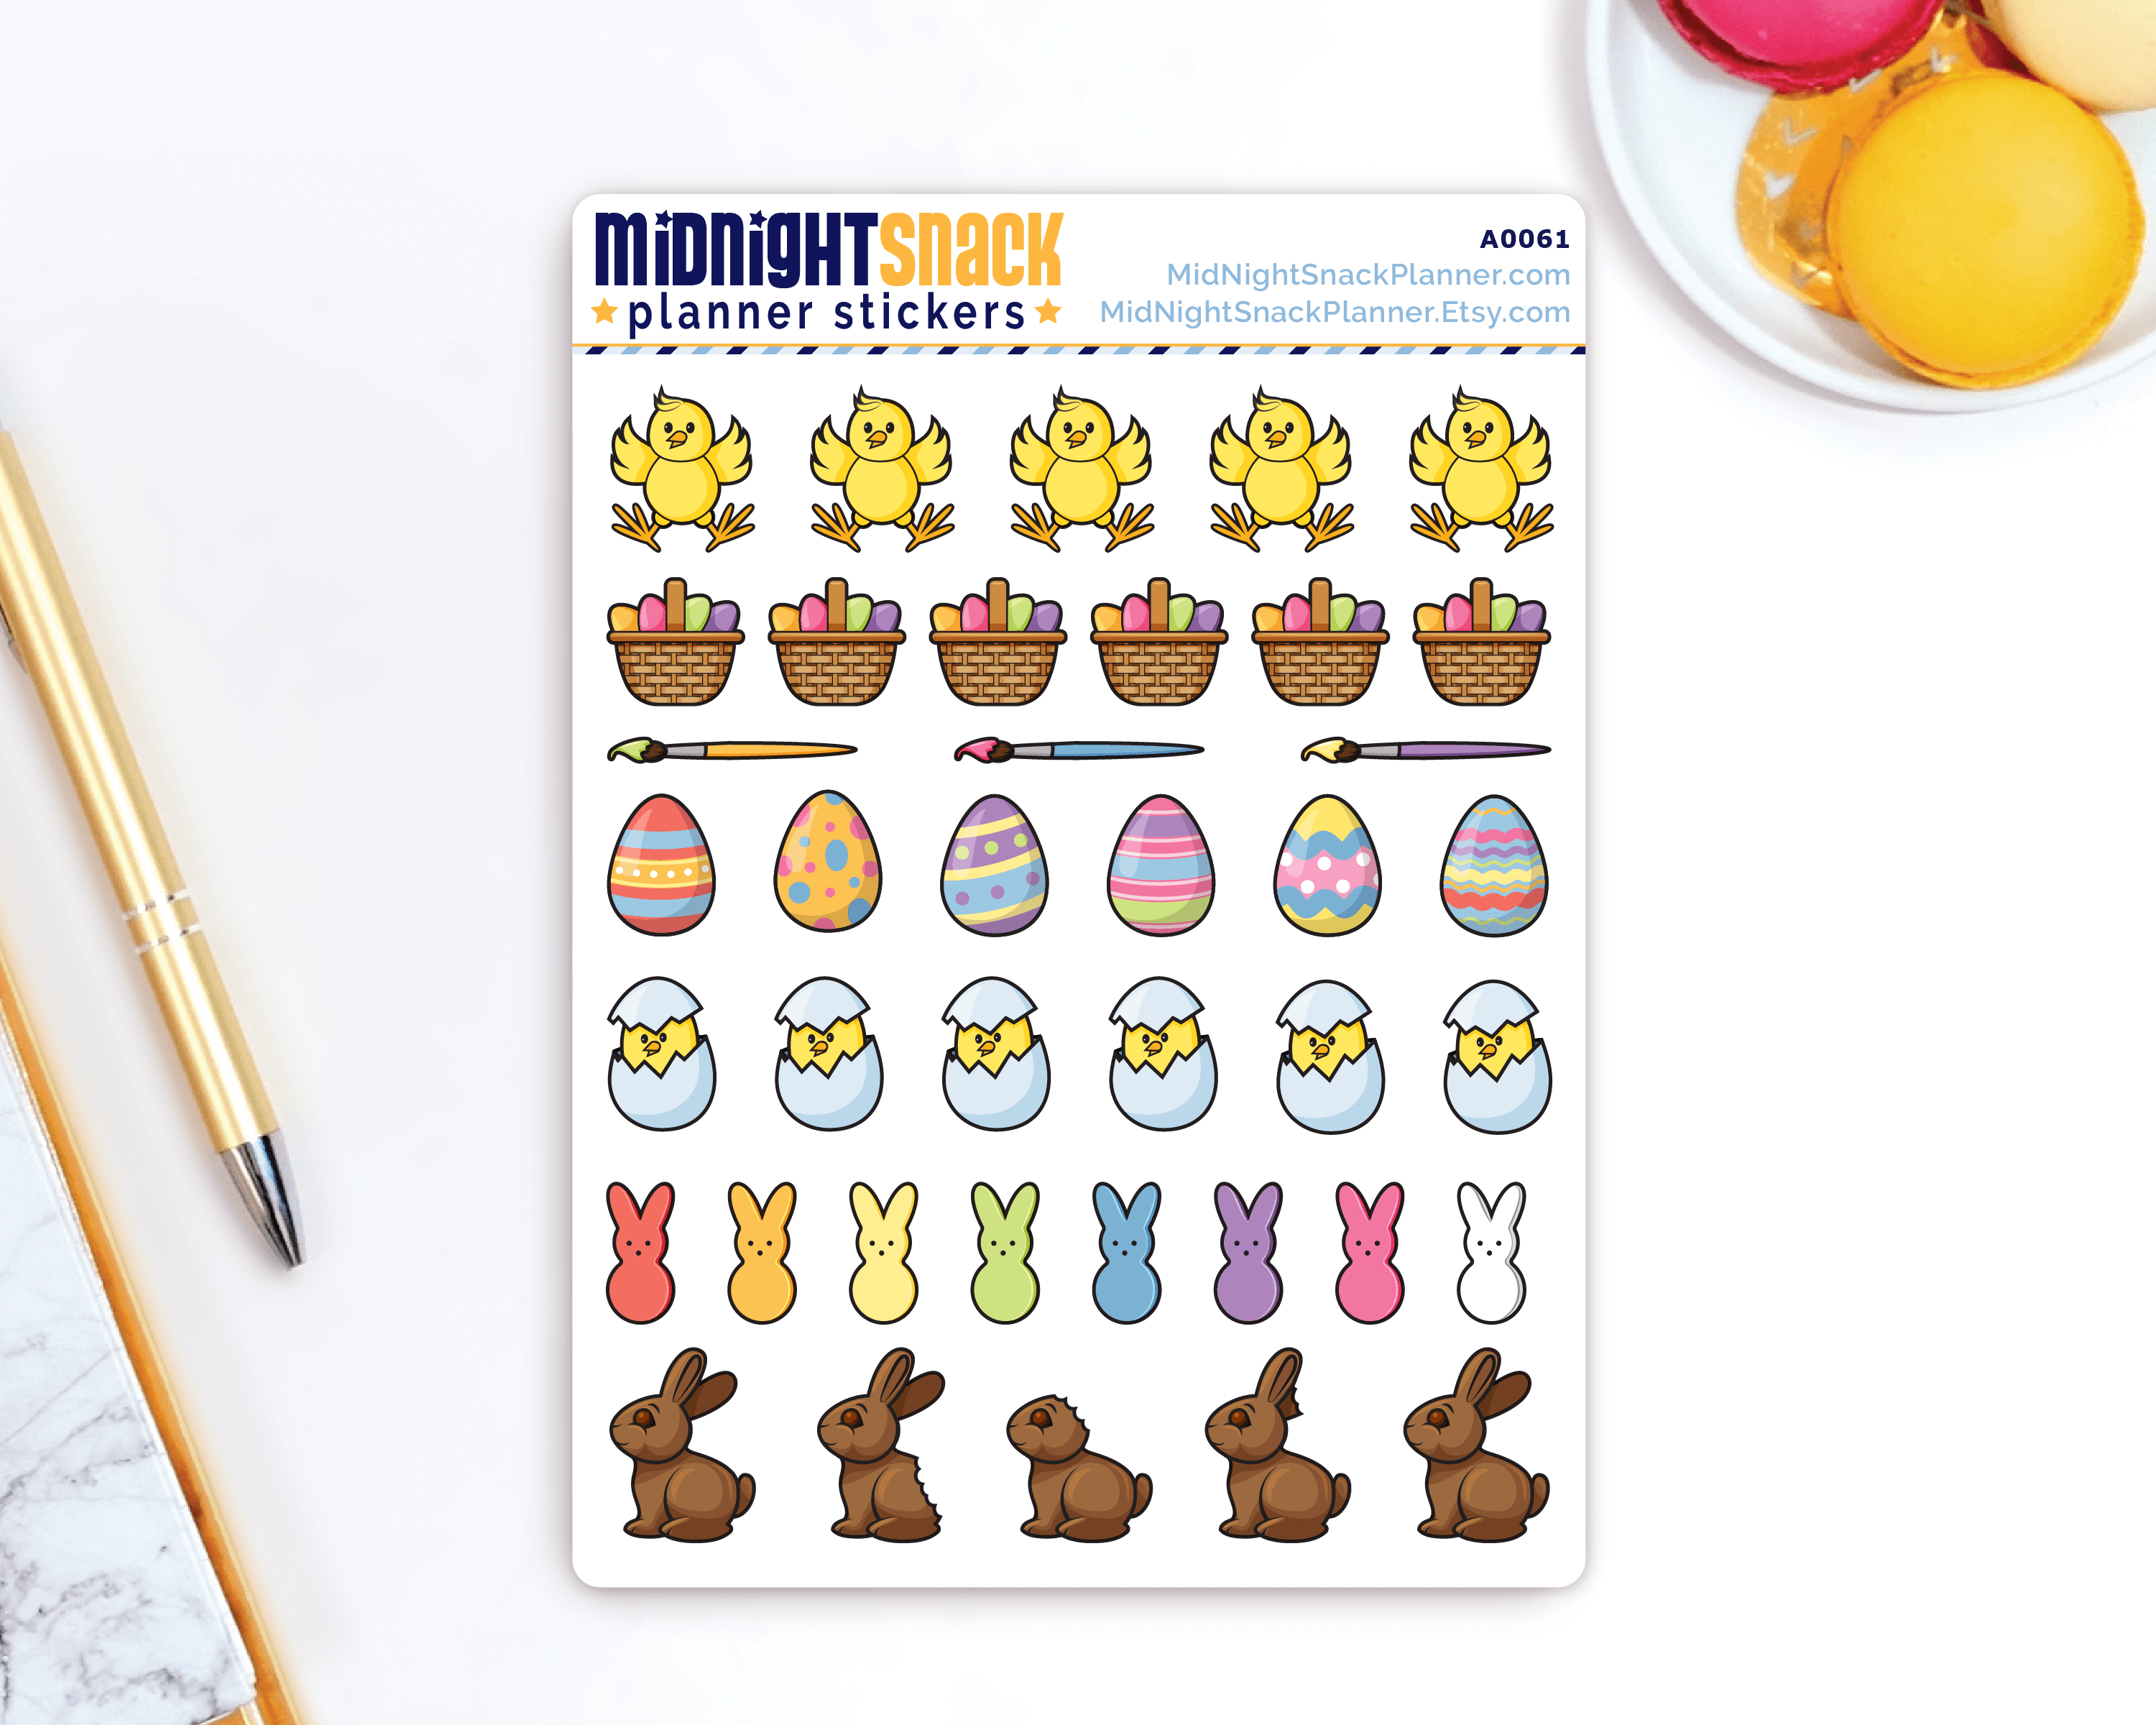 Easter Sampler Holiday Planner Stickers: Midnight Snack Planner Stickers